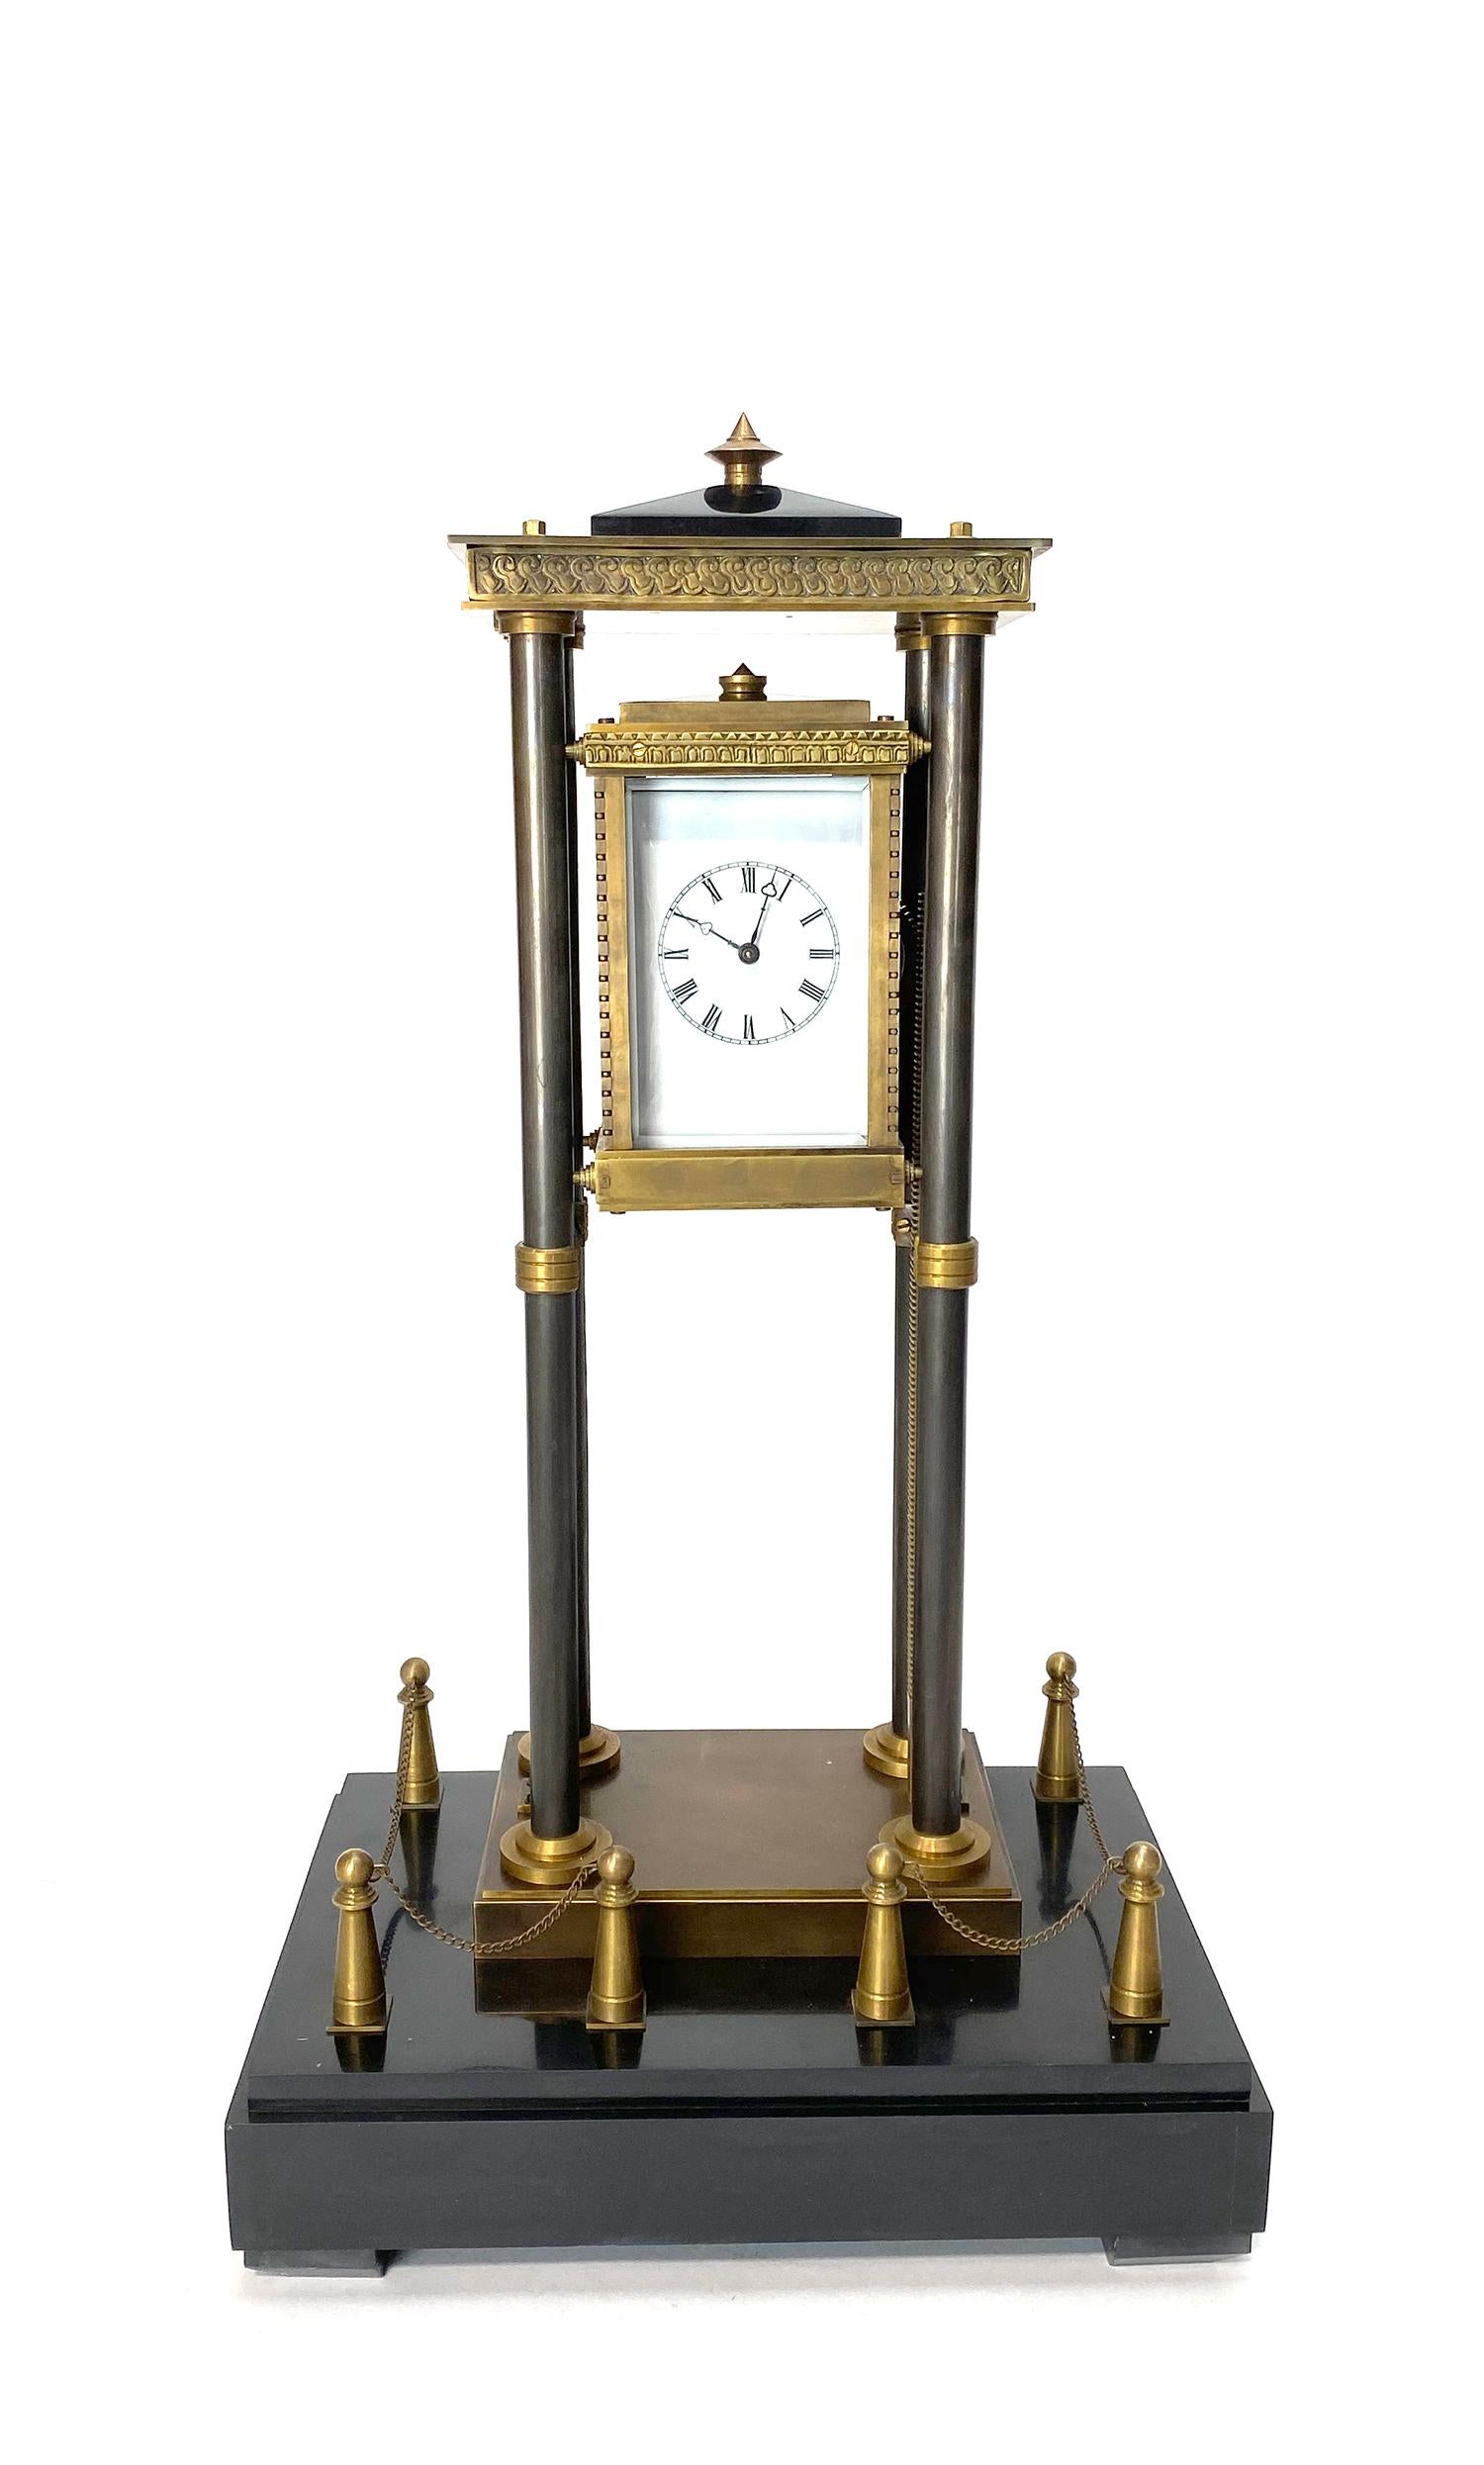 French Style Gravity Driven Industrial Elevator Industrial Clock w Marble Base

Here we have a wonderful example of the industrial series popular in French horology. This clock is driven by its own weight as it slows falls downwards on the 4 posts.